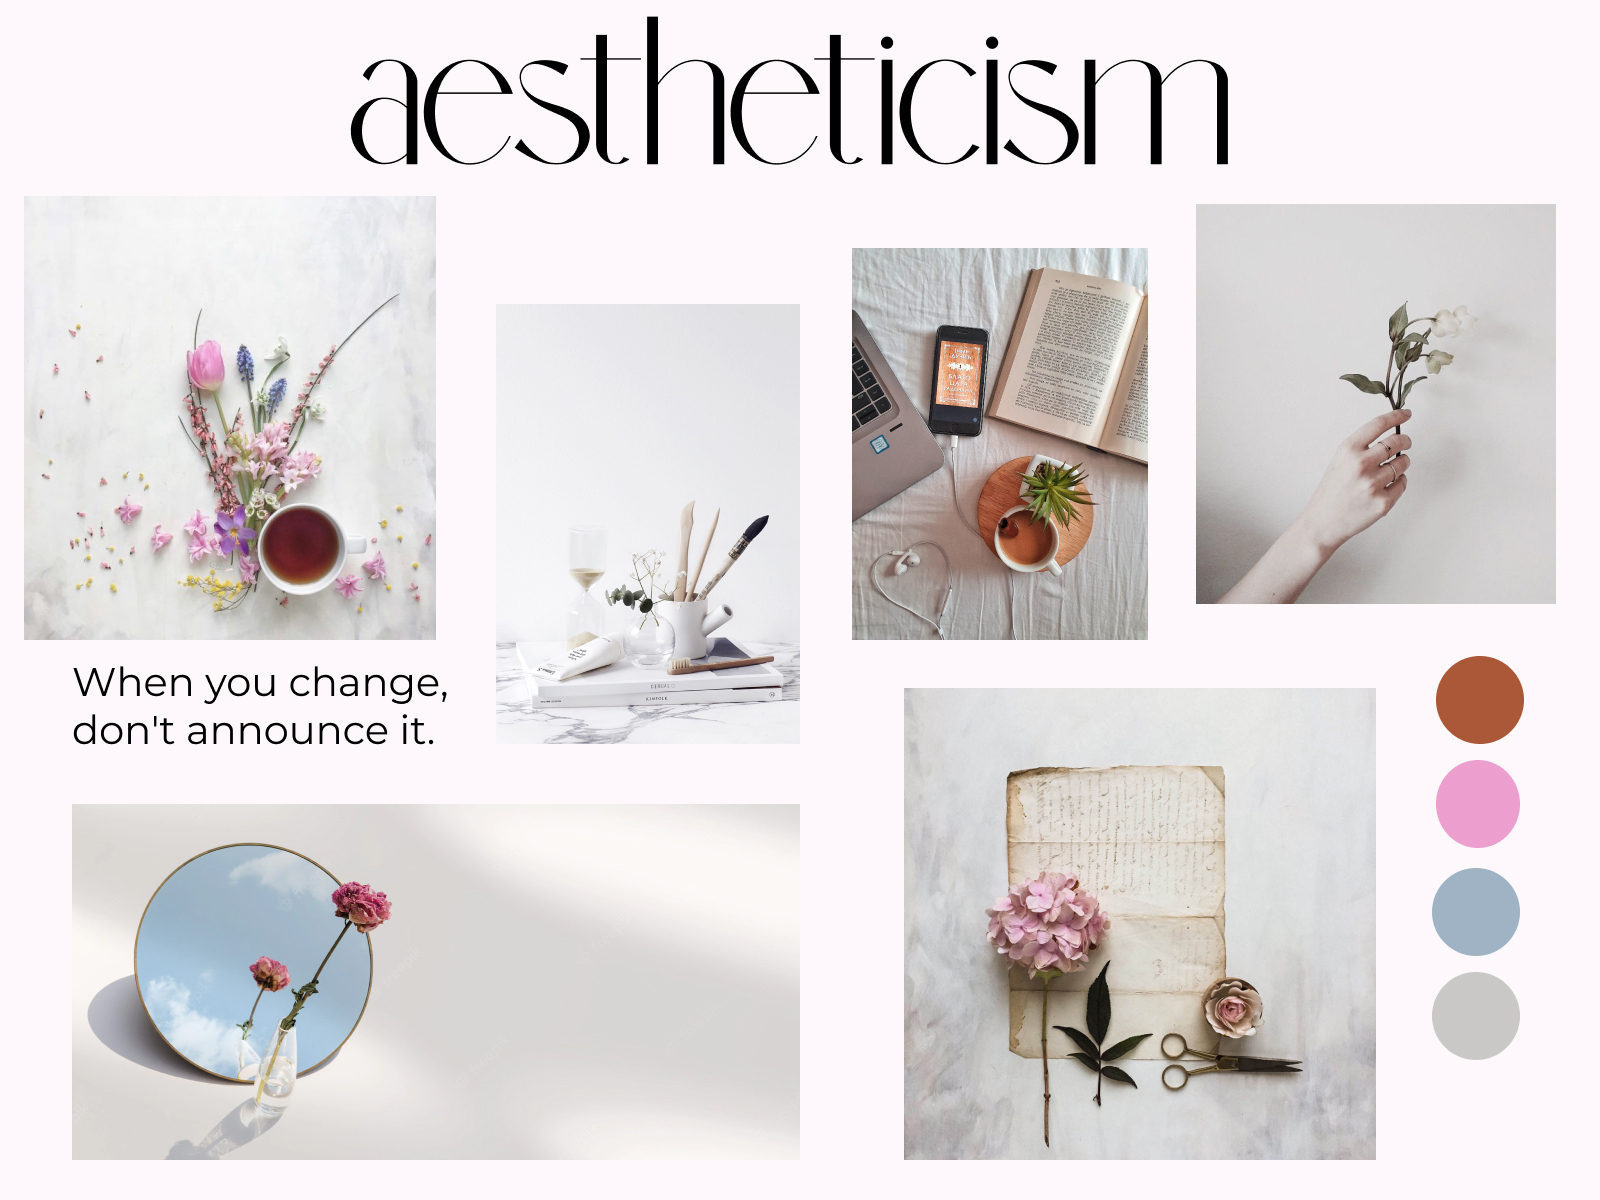 Aesthetic Moodboard by Ana David's on Dribbble